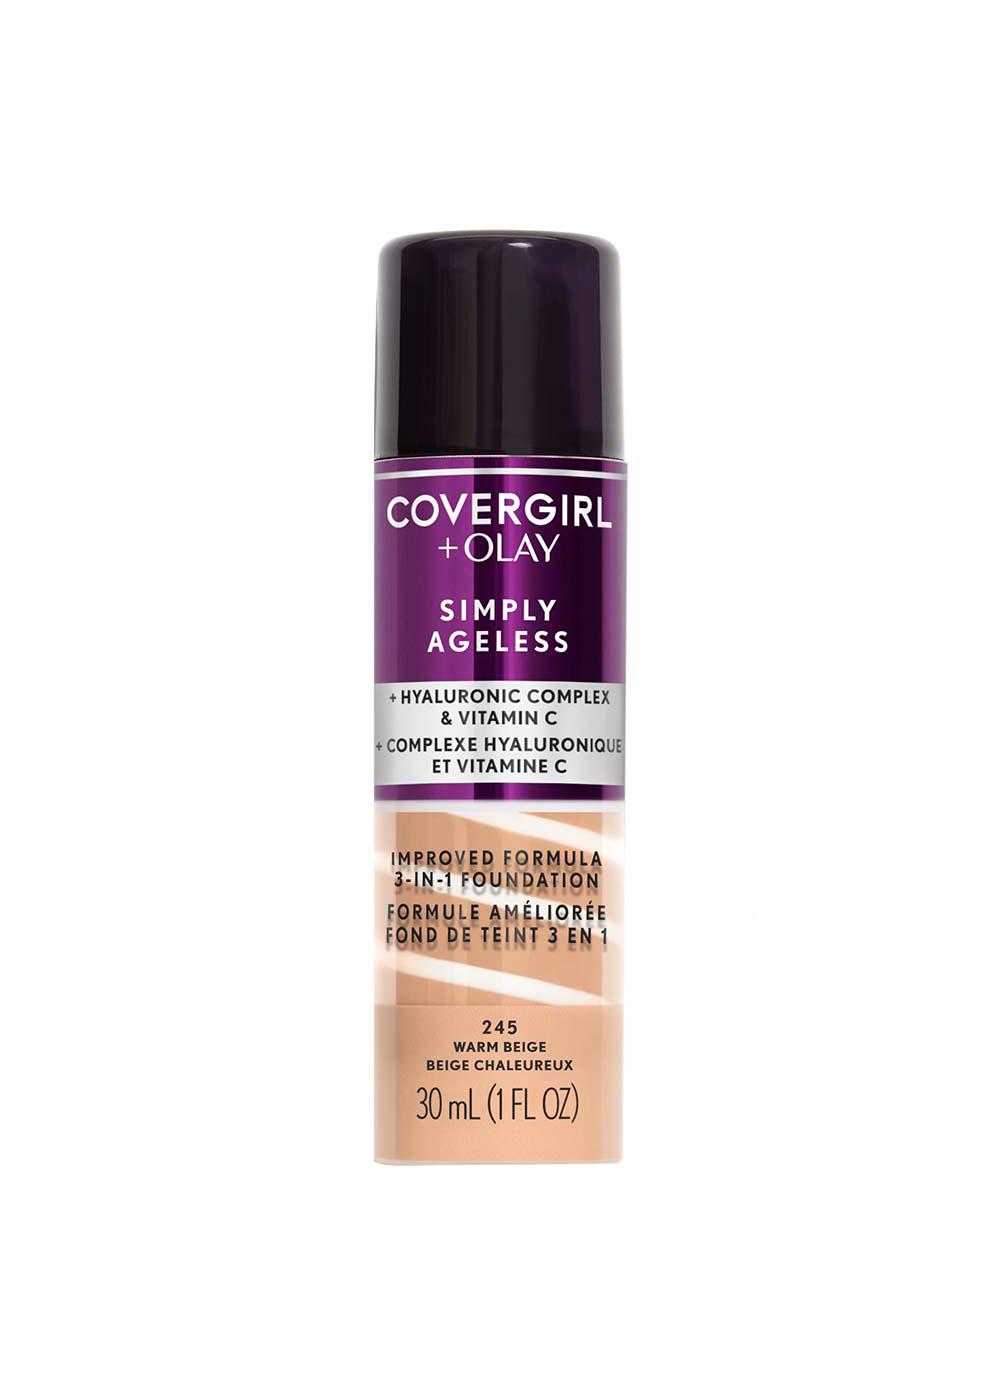 Covergirl Simply Ageless 3-in-1 Liquid Foundation 245 Warm Beige; image 1 of 6